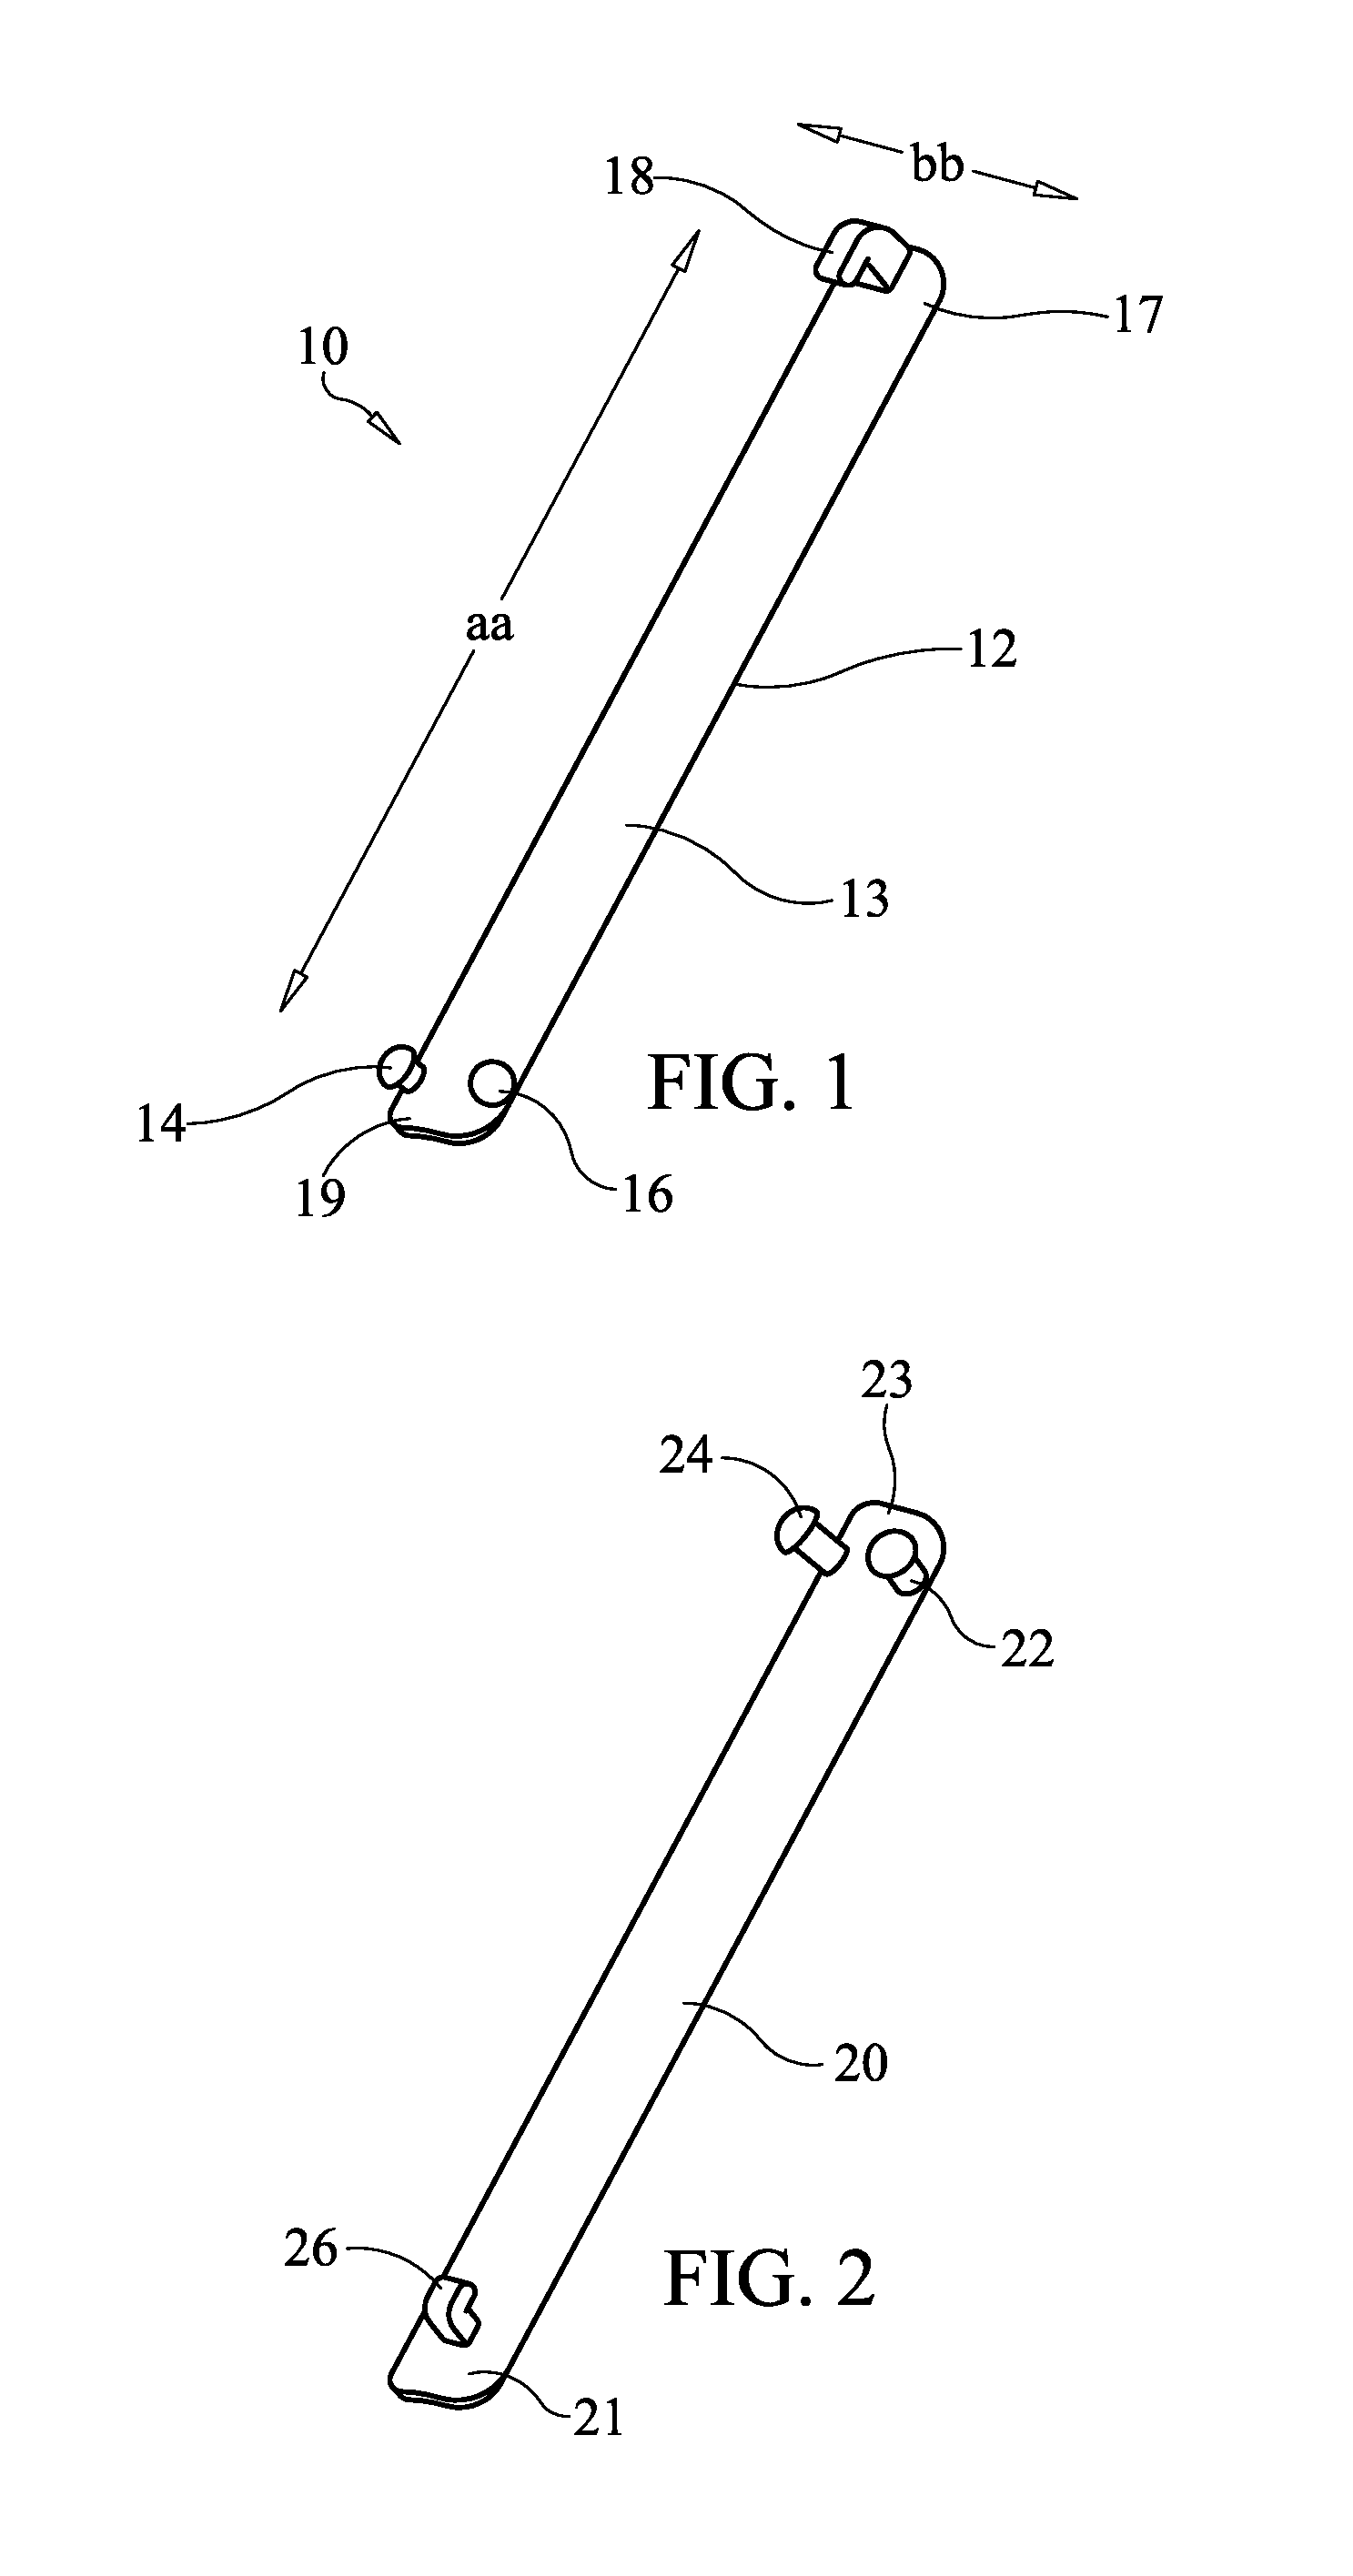 Retractor extensions and methods of use